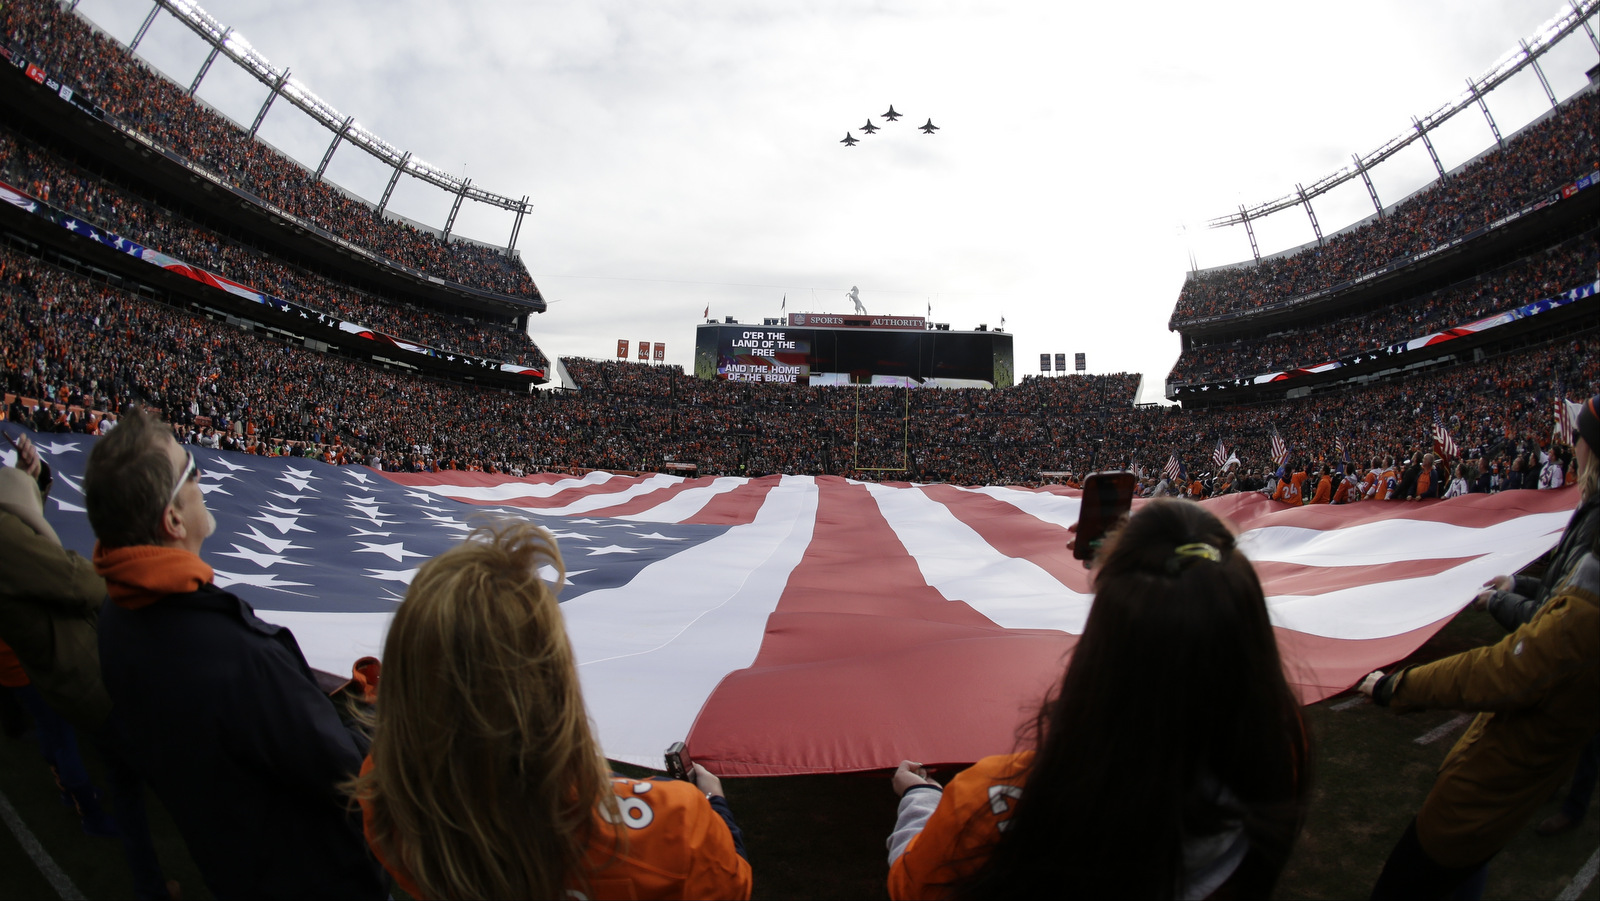 A giant U.S. flag is displayed during a military fly-over at Sports Authority Field at Mile High before an NFL football game between the Denver Broncos and the Oakland Raiders, Sunday, Jan. 1, 2017, in Denver. (AP/Jack Dempsey)